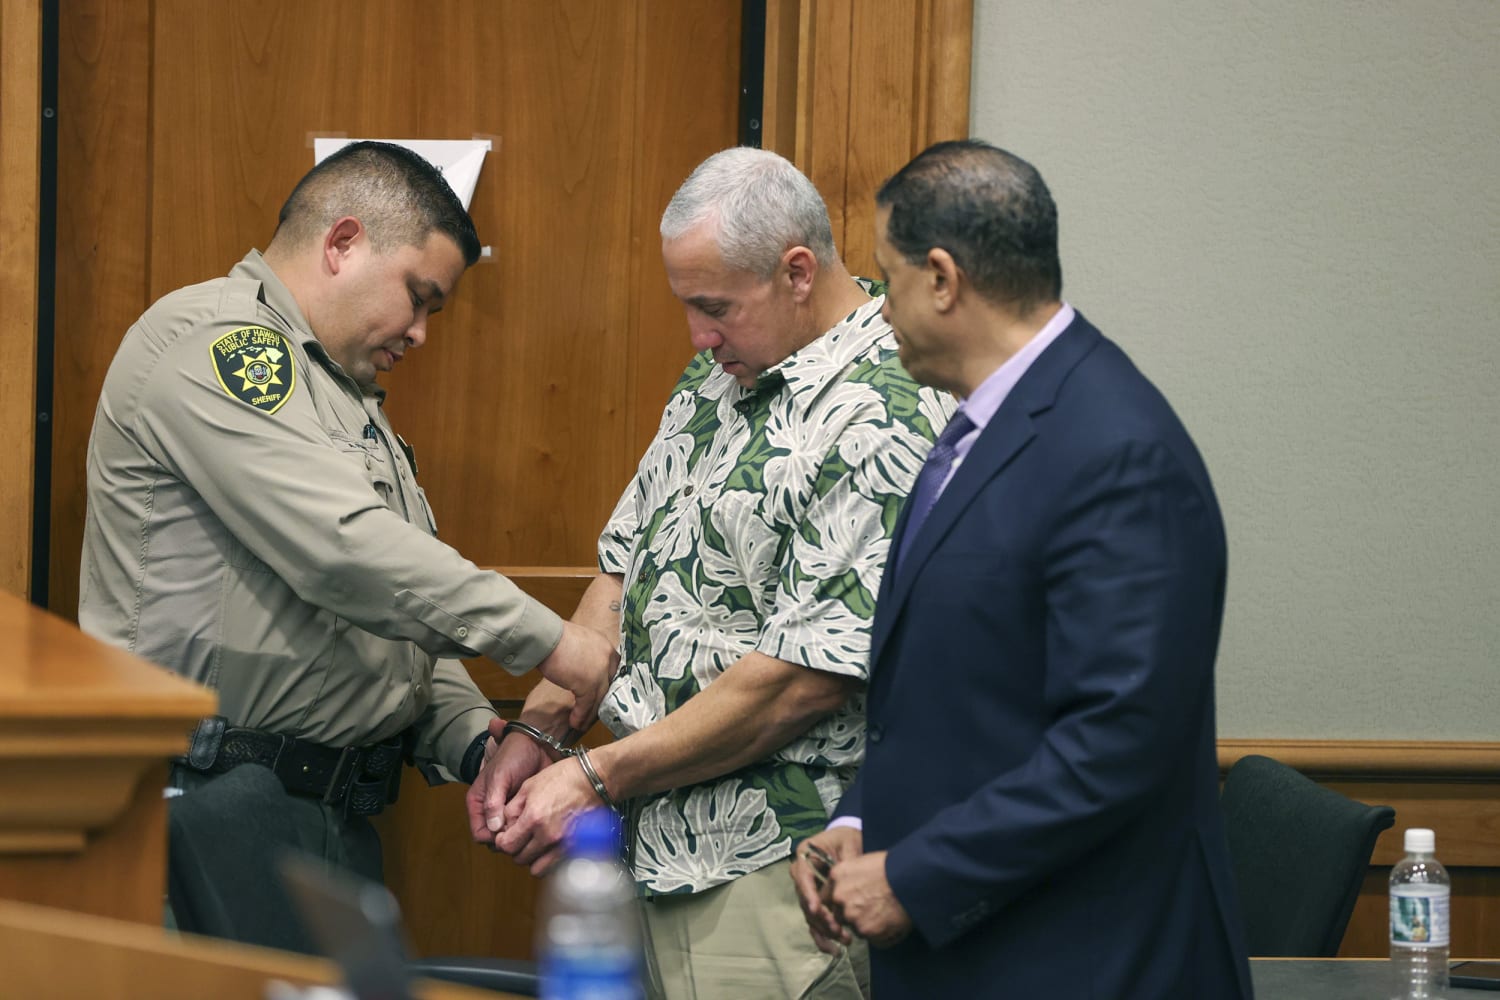 Hawaii man imprisoned for 1991 murder and rape of tourist released after judge hears new evidence of innocence